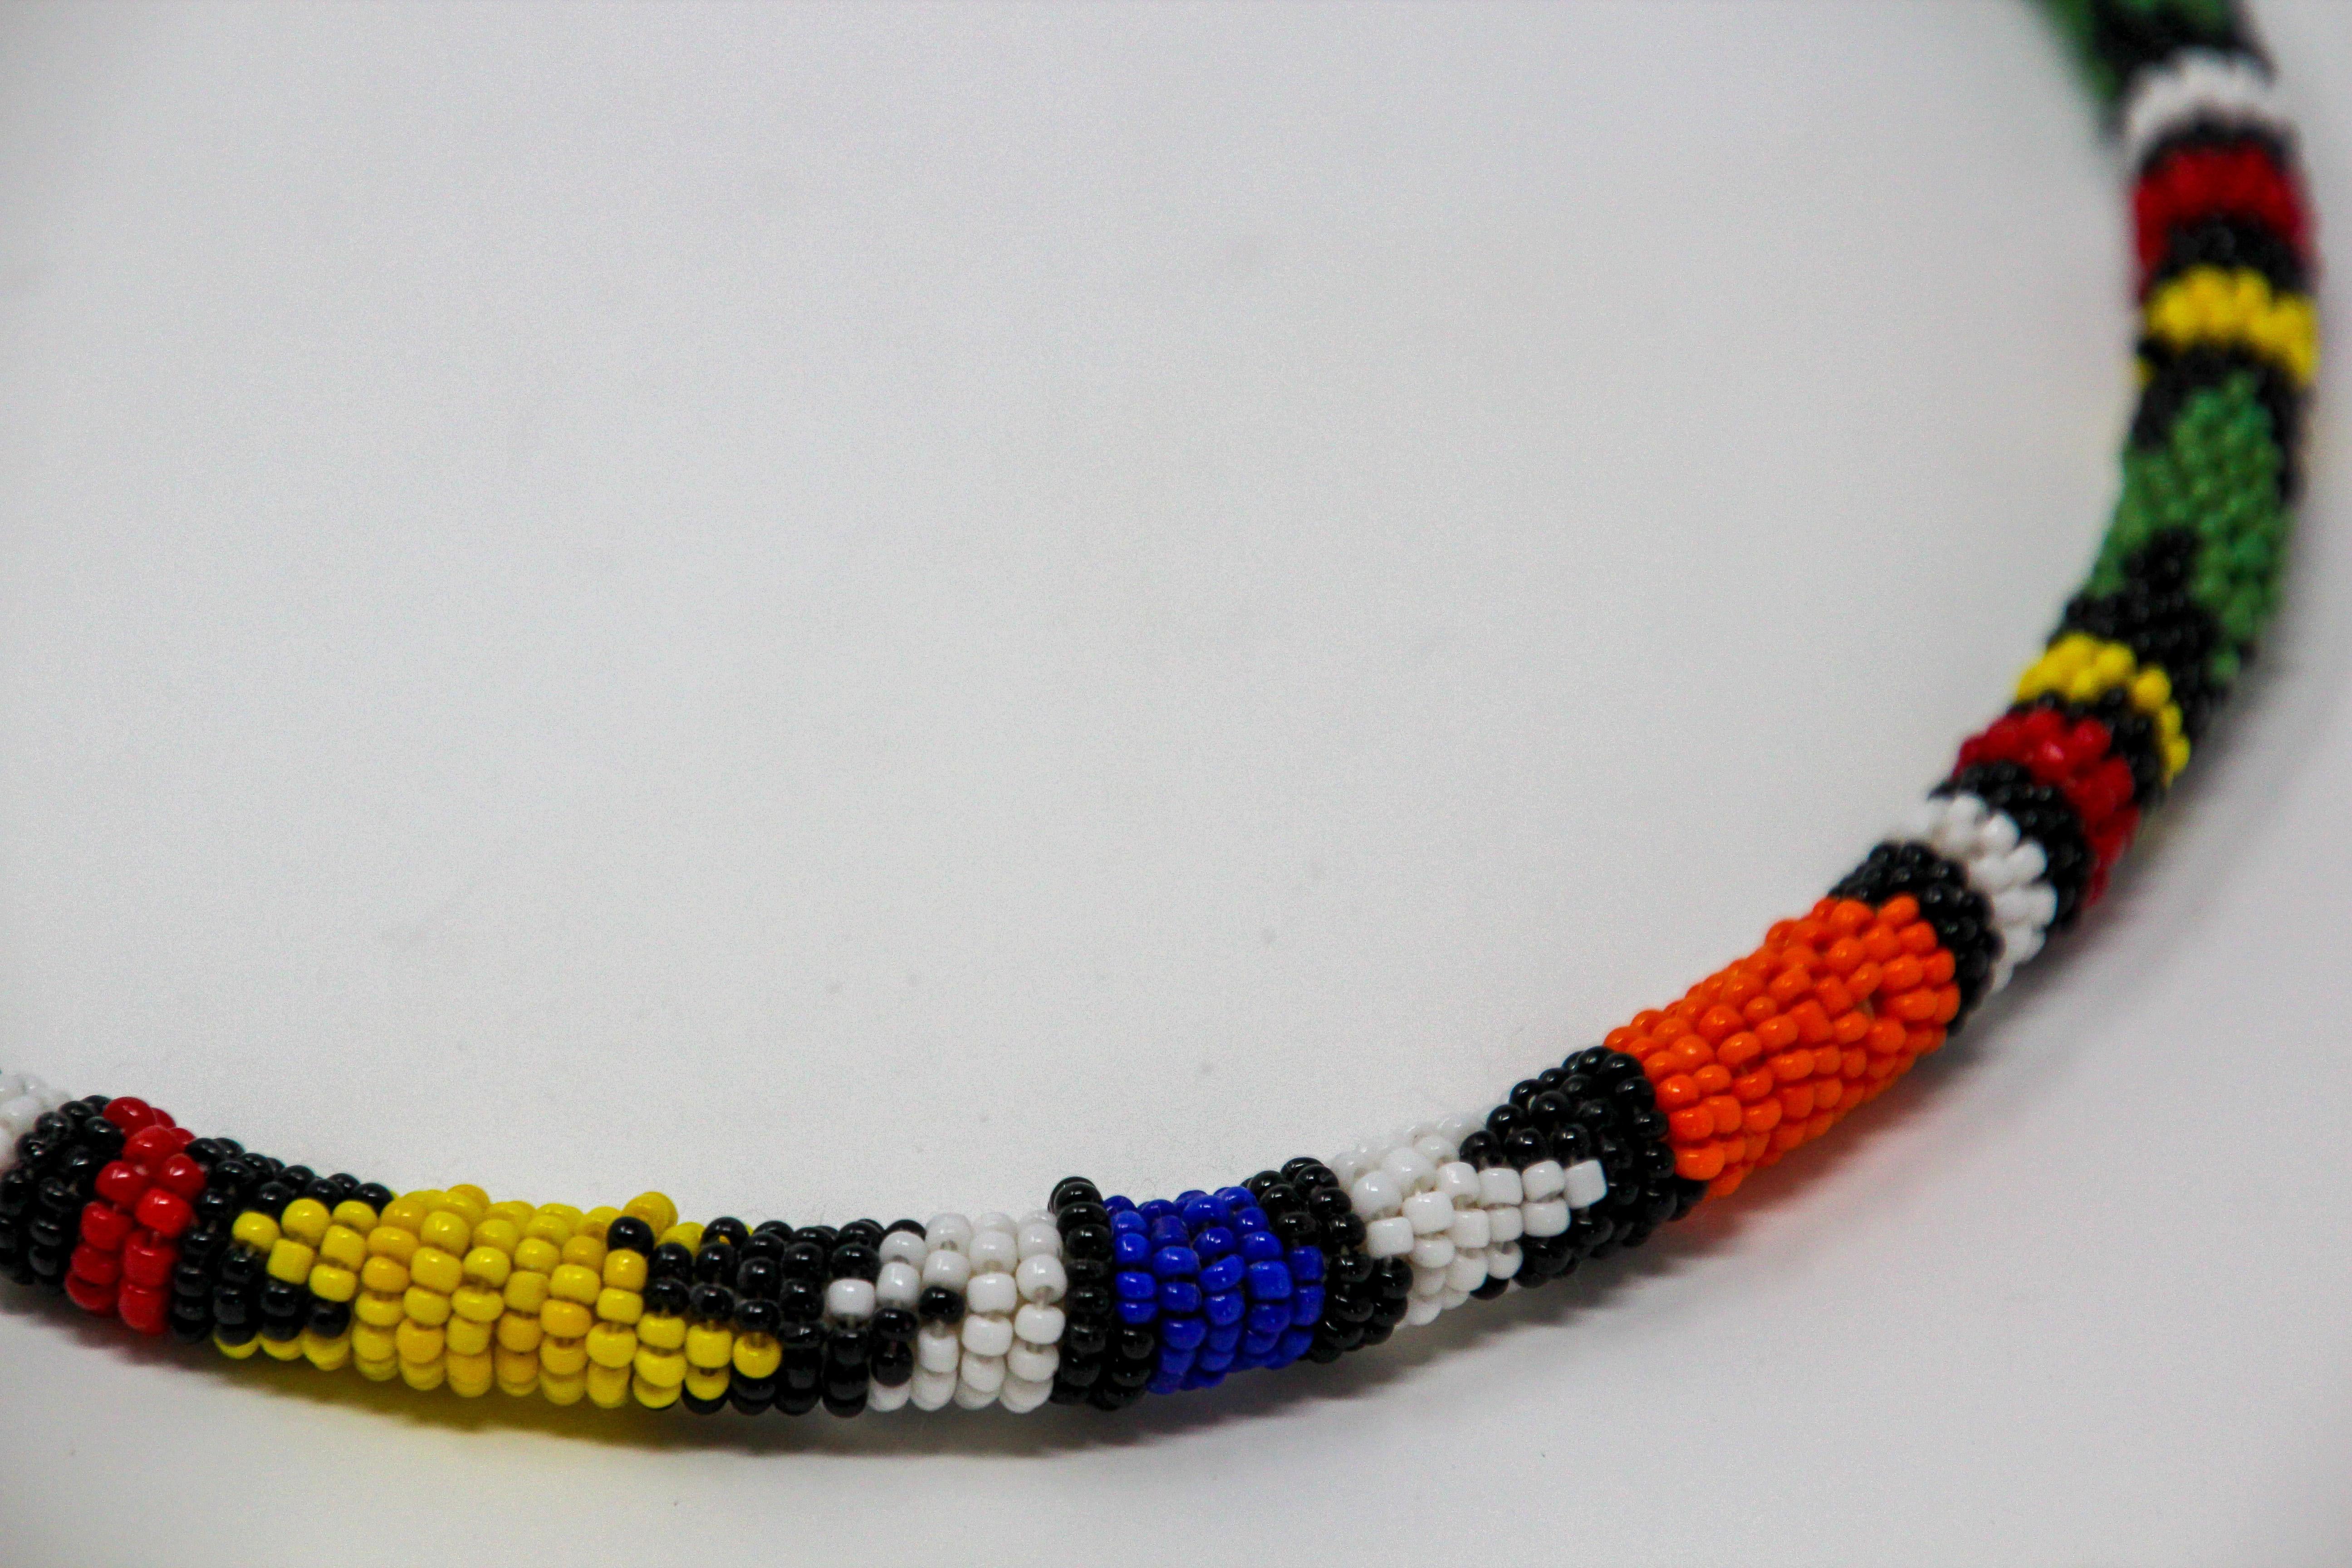 Vintage African Urembo Beaded Necklace Choker by the Maasai Tribe Kenya 2